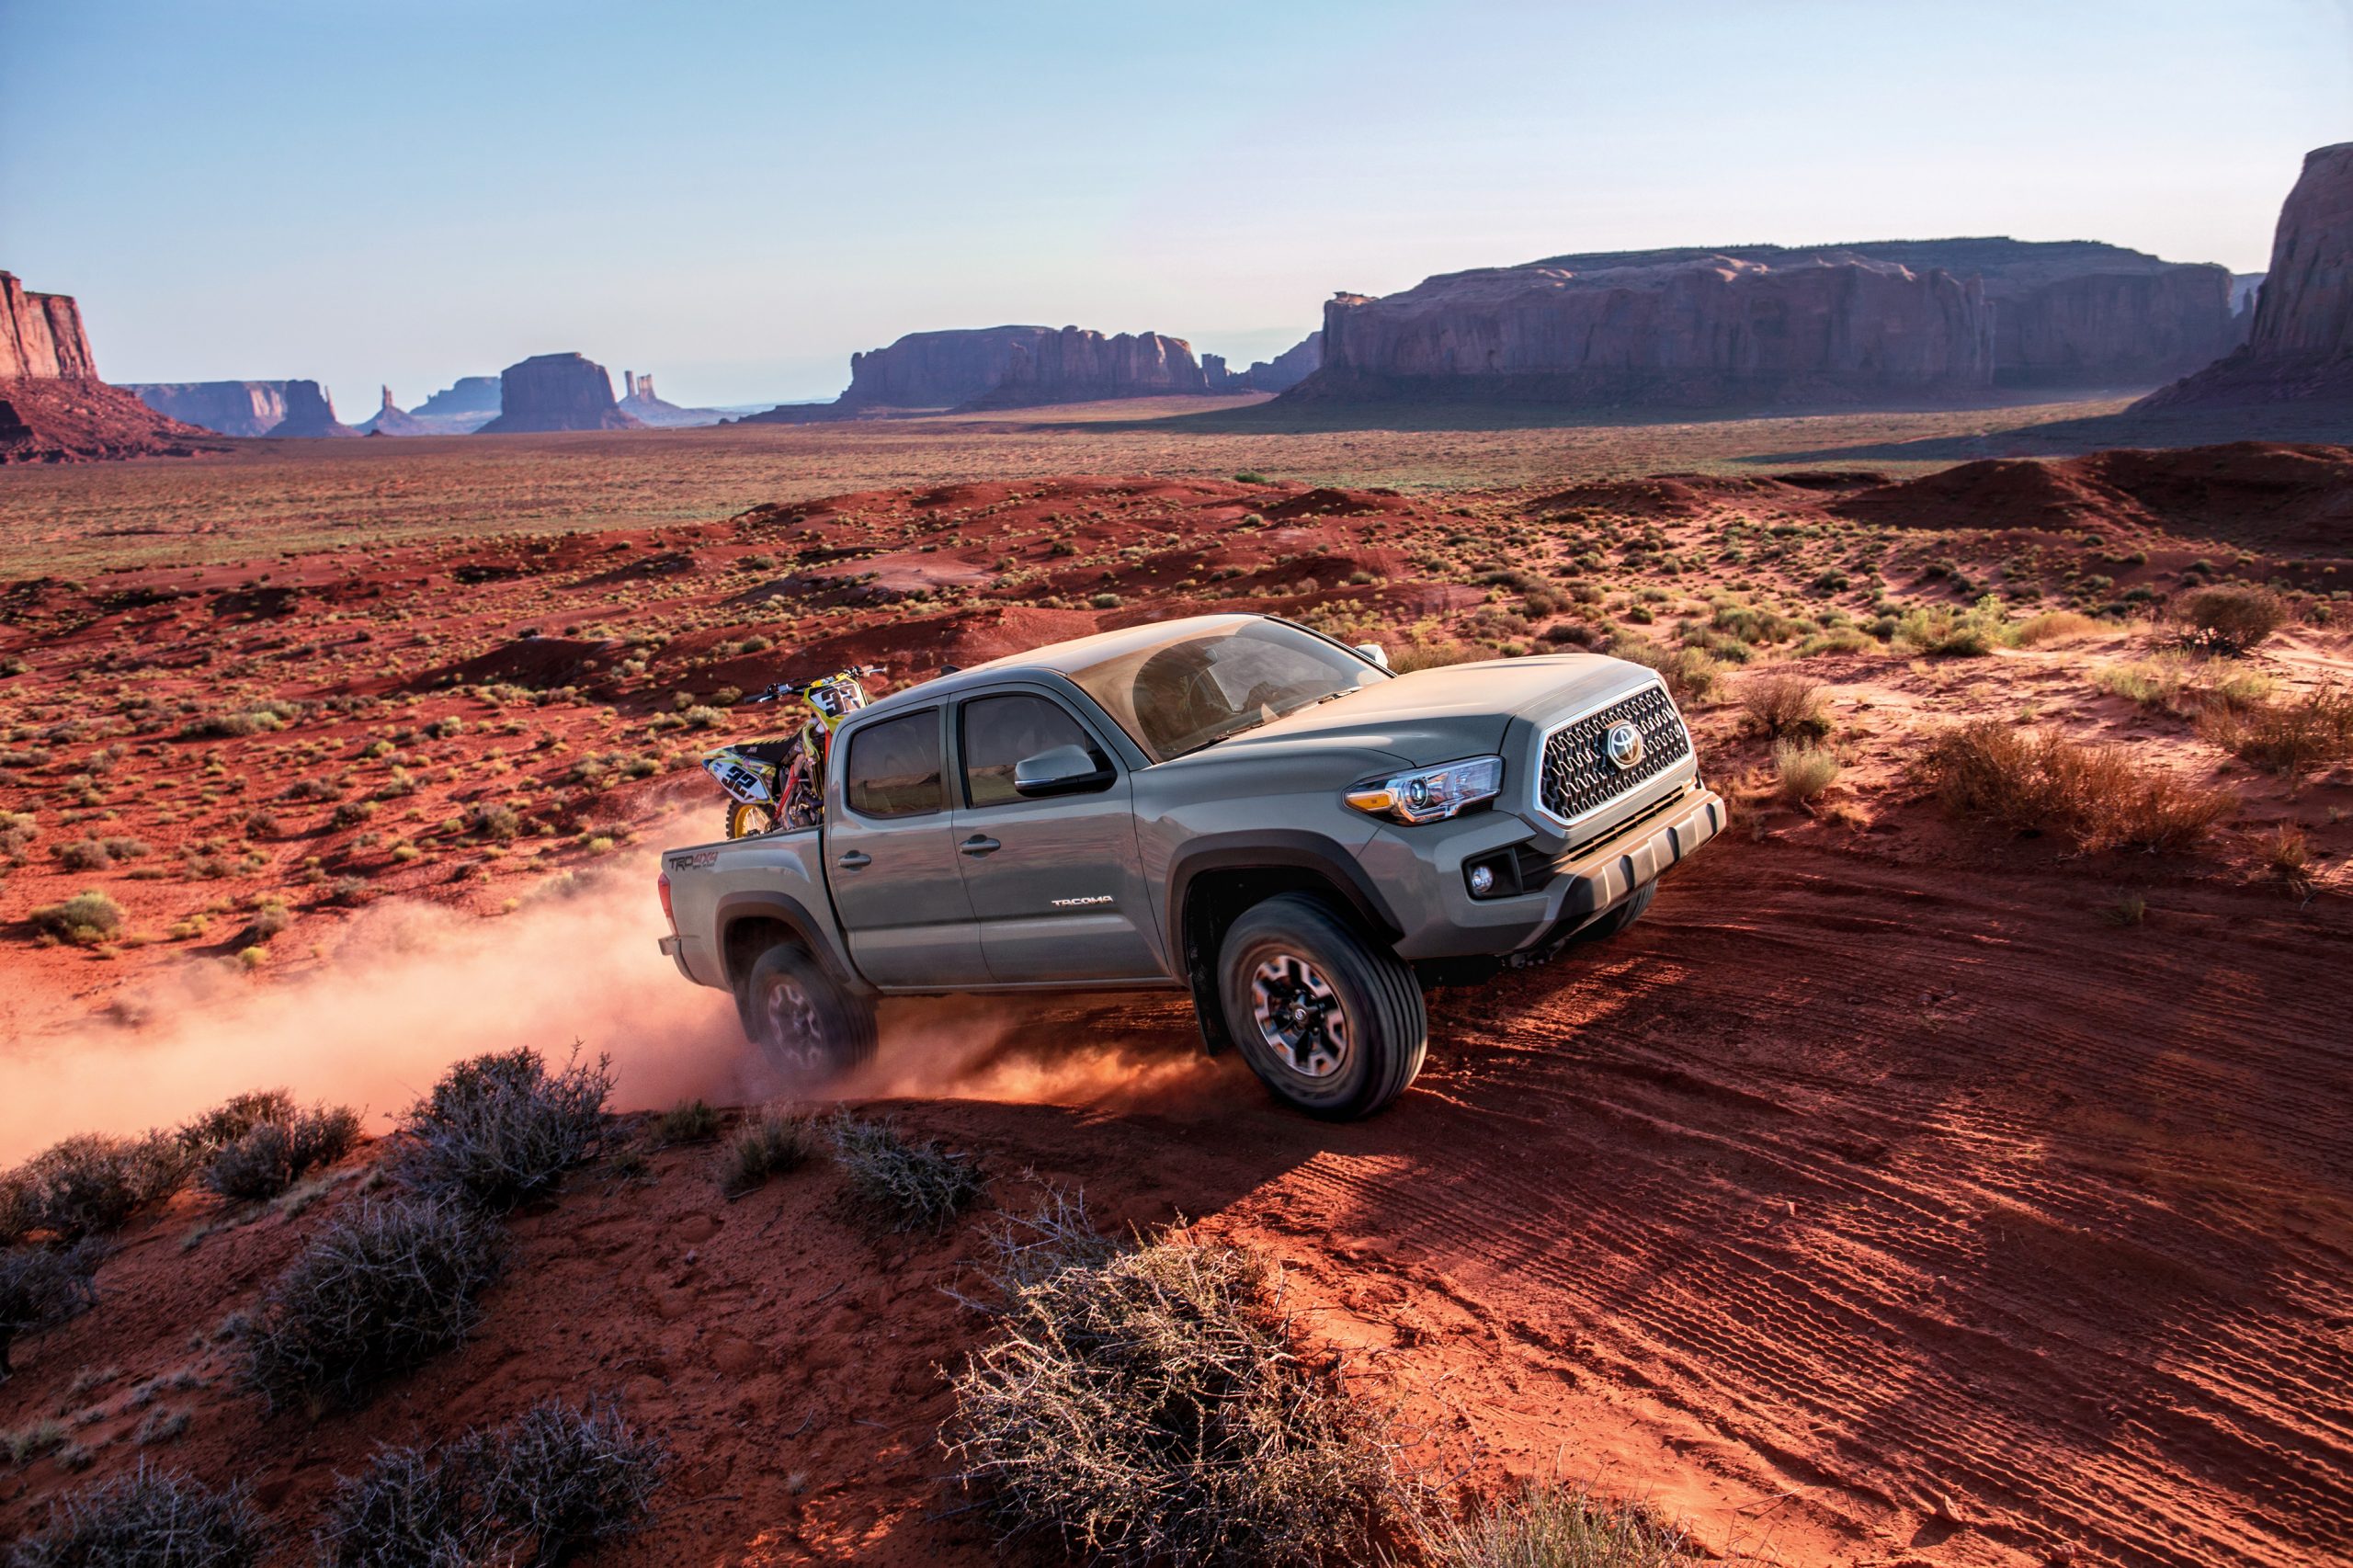 Occasion beaucage blogue top 5 camions usagées 2018 toyota tacoma 2018